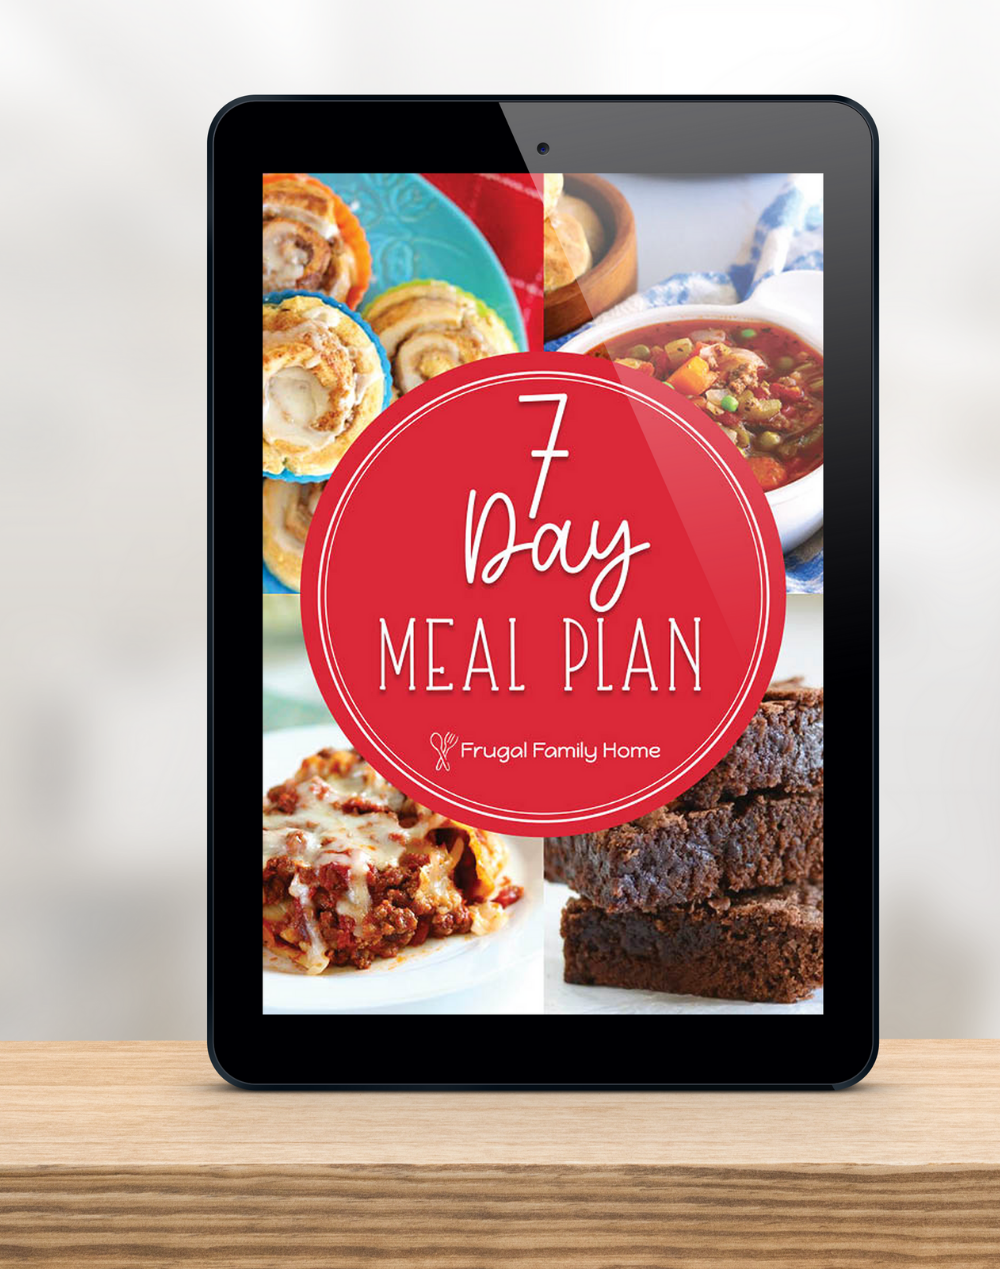 This is a digital file 7 day meal plan you can use it on a device or print it.